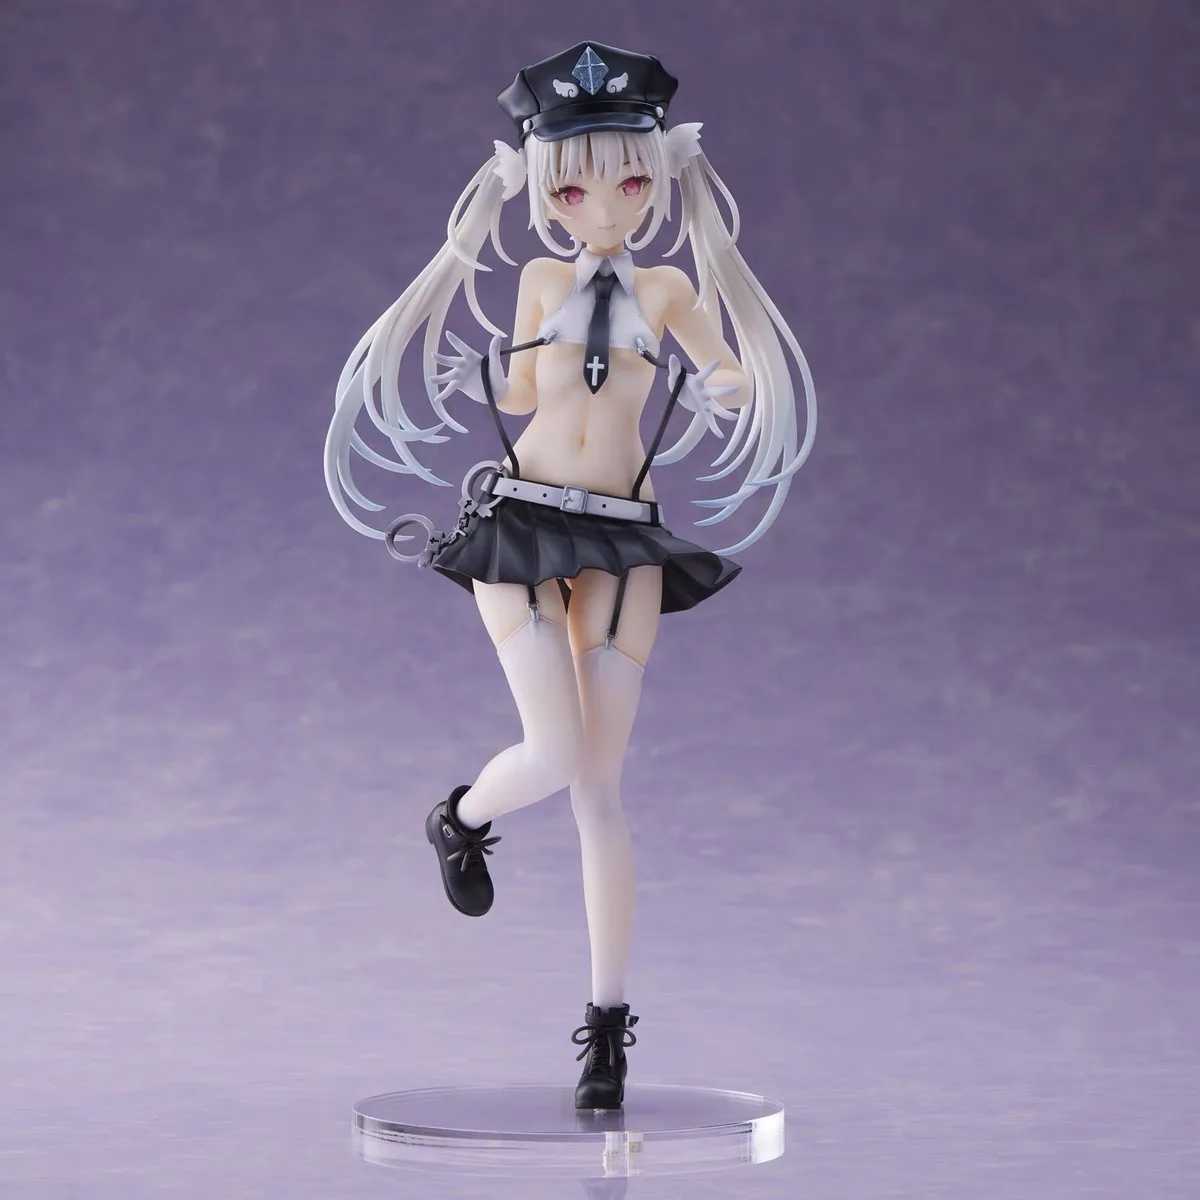 Action Action Toy Figures 23cm Creative Anime Figure Angel Police Sexy Girl PVC Action Figure Modive Figuine Model Toys Doll Doll Y240425ZX41